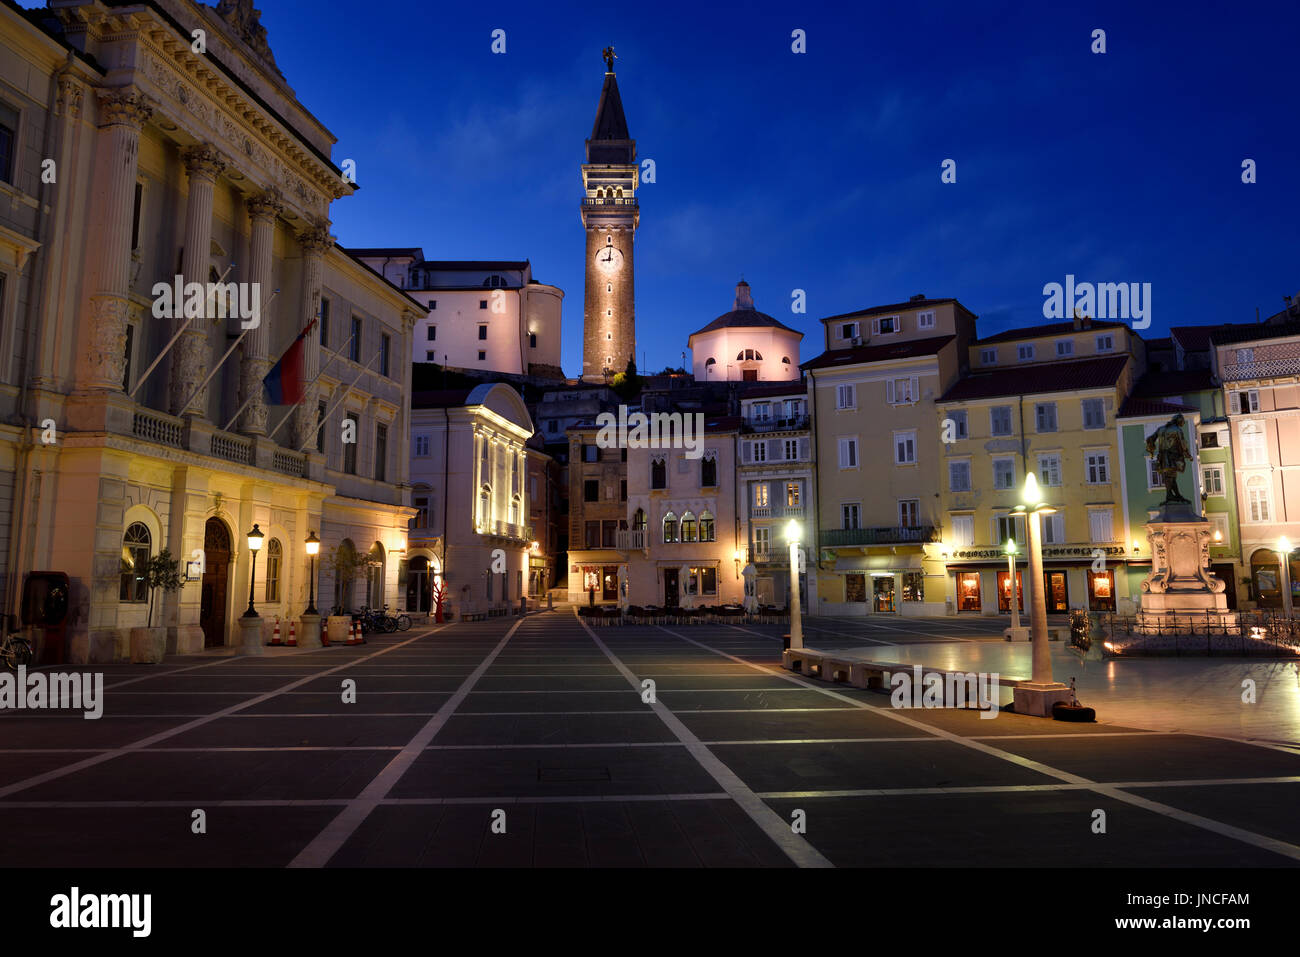 Tartini Square in Piran Slovenia with City Hall, Venetian House, Tartini statue, and St. George's Parish Church with baptistry at dusk twilight Stock Photo